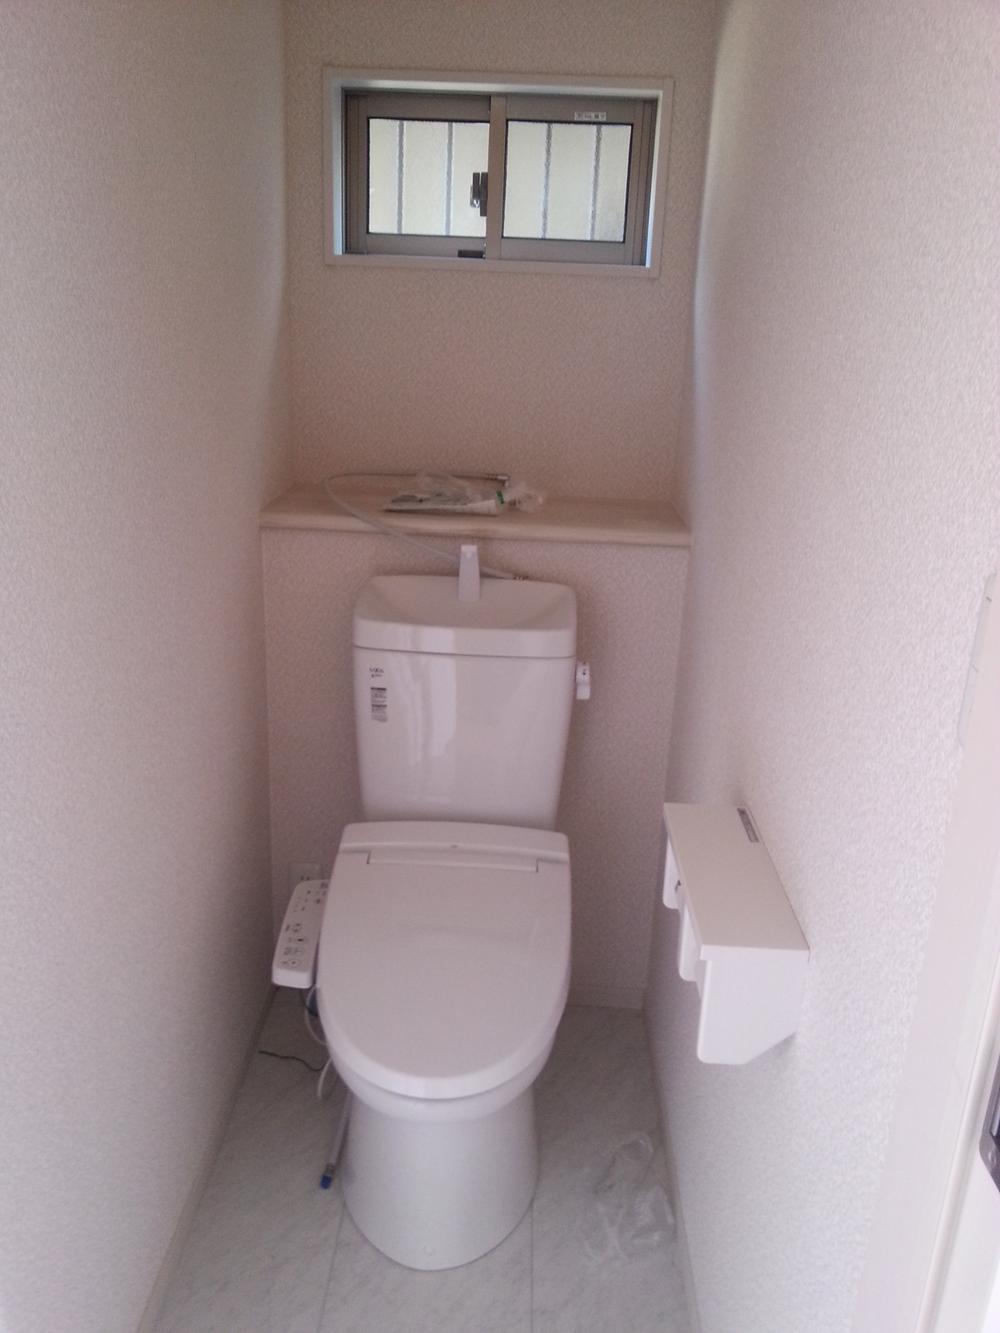 Toilet. 1F toilet (warm water cleaning toilet seat)